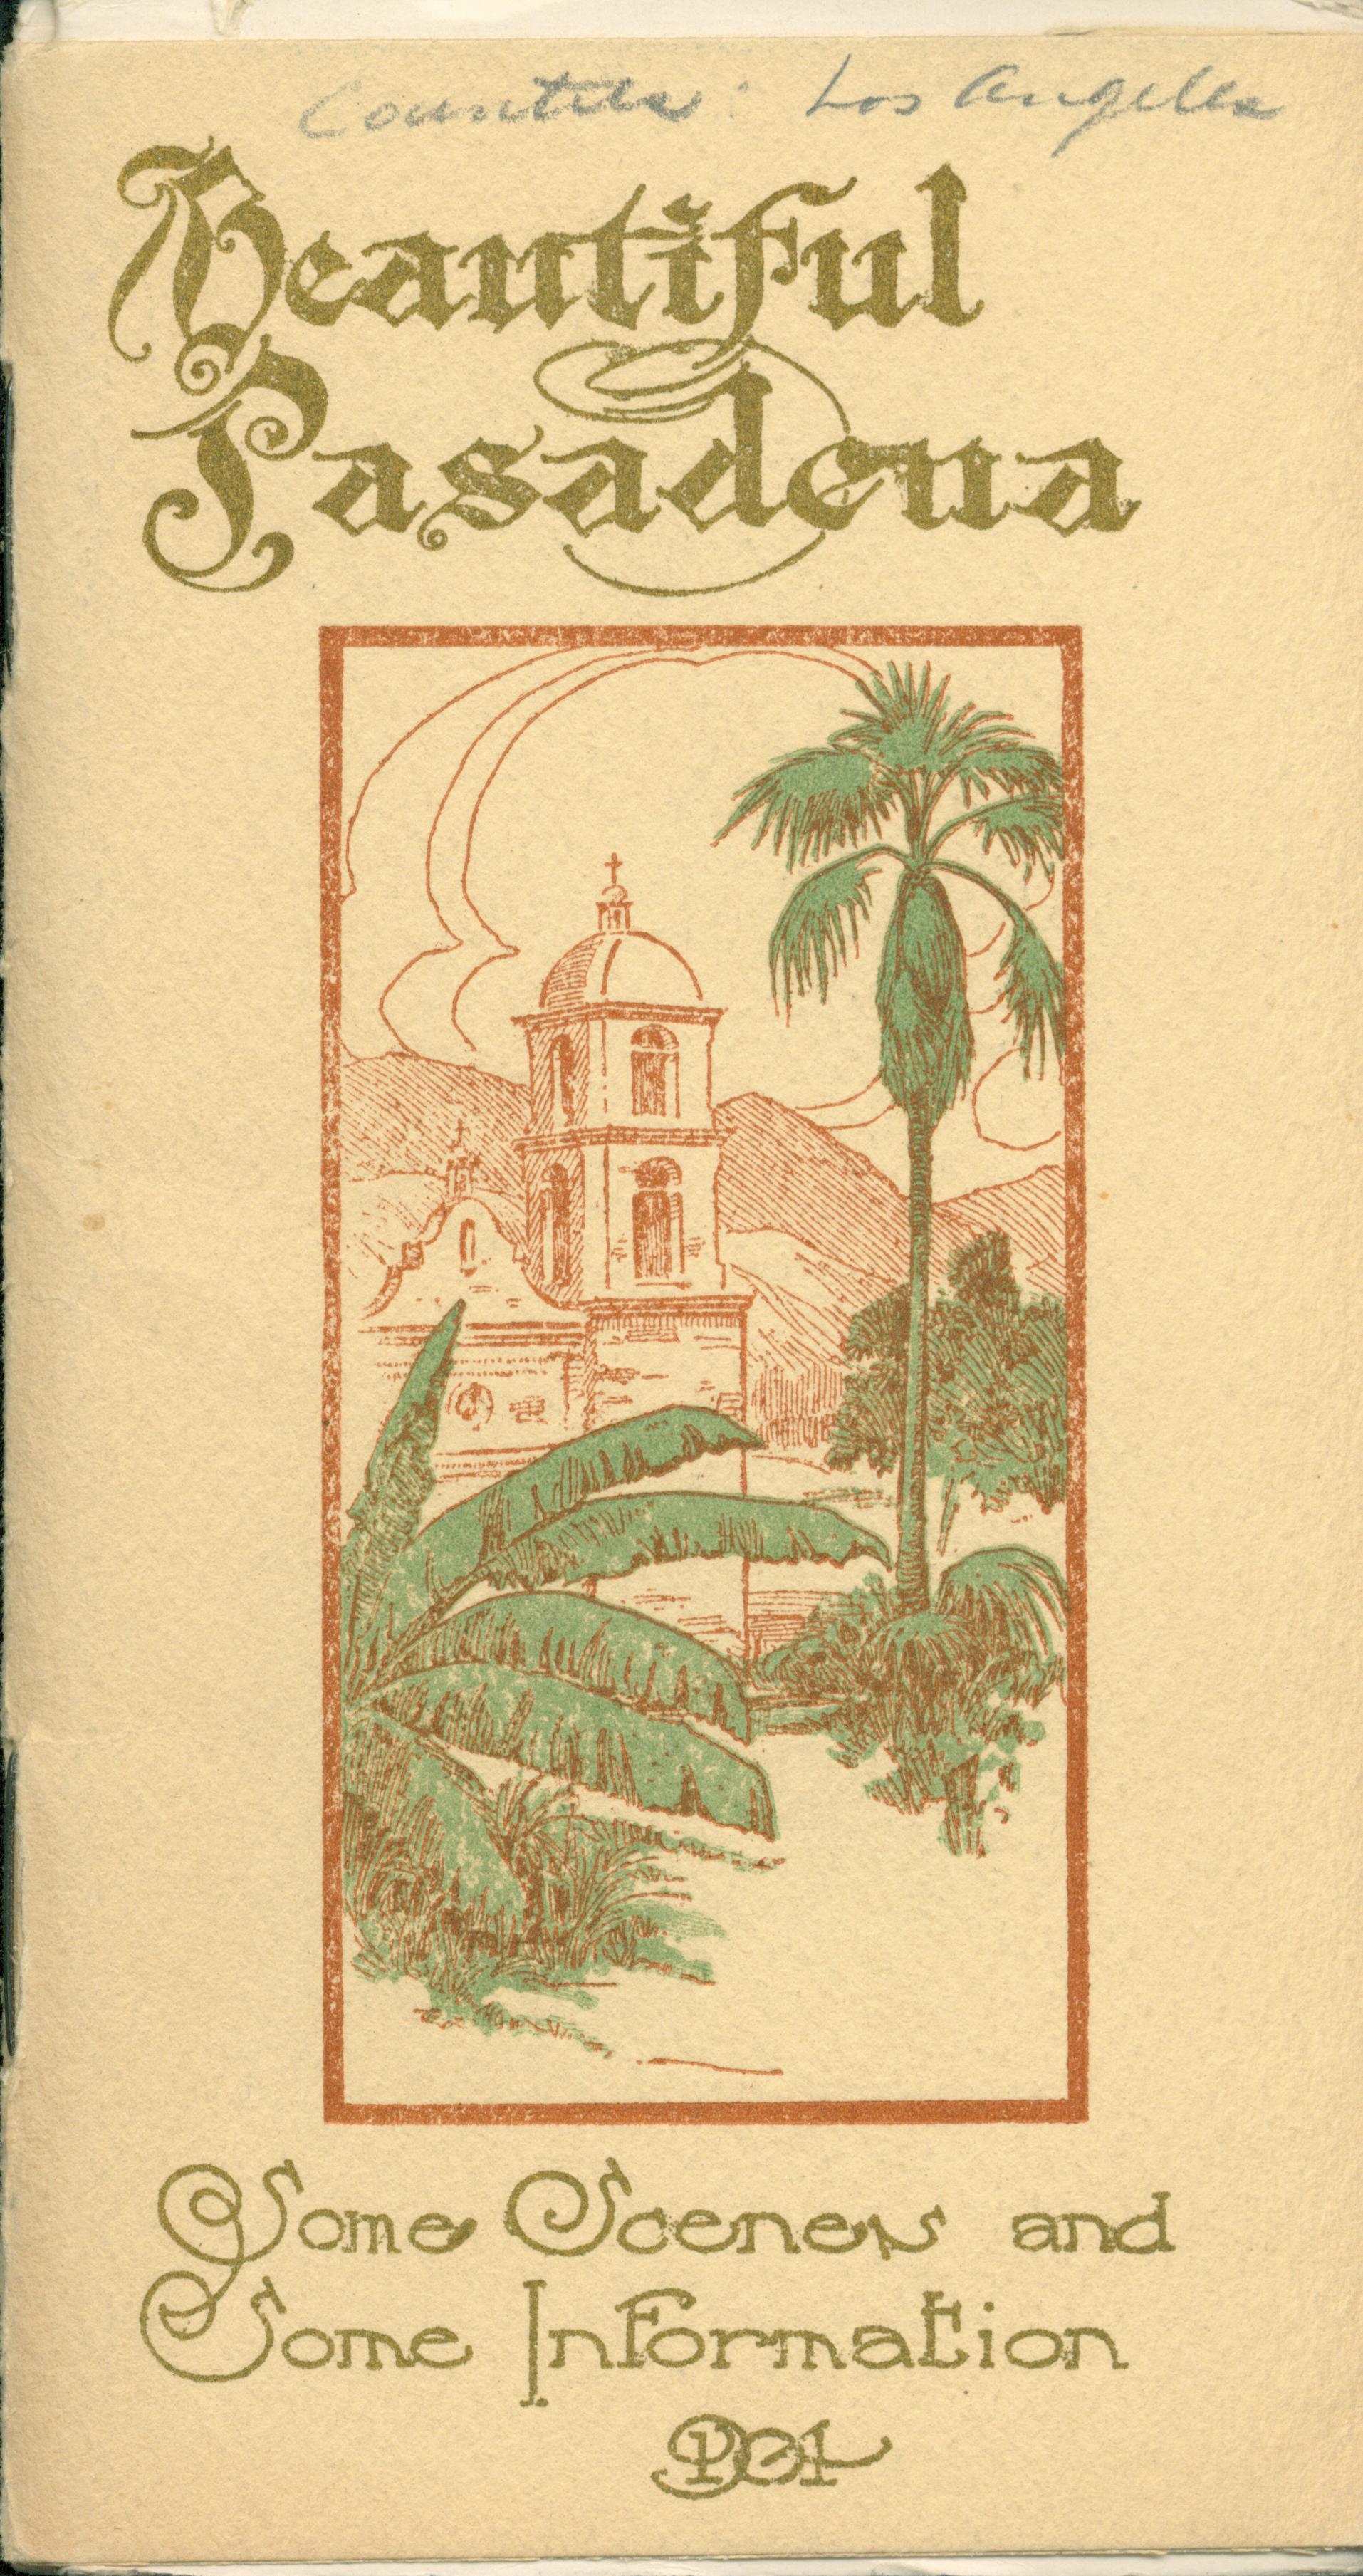 Front cover shows a print of a mission surrounded by title information